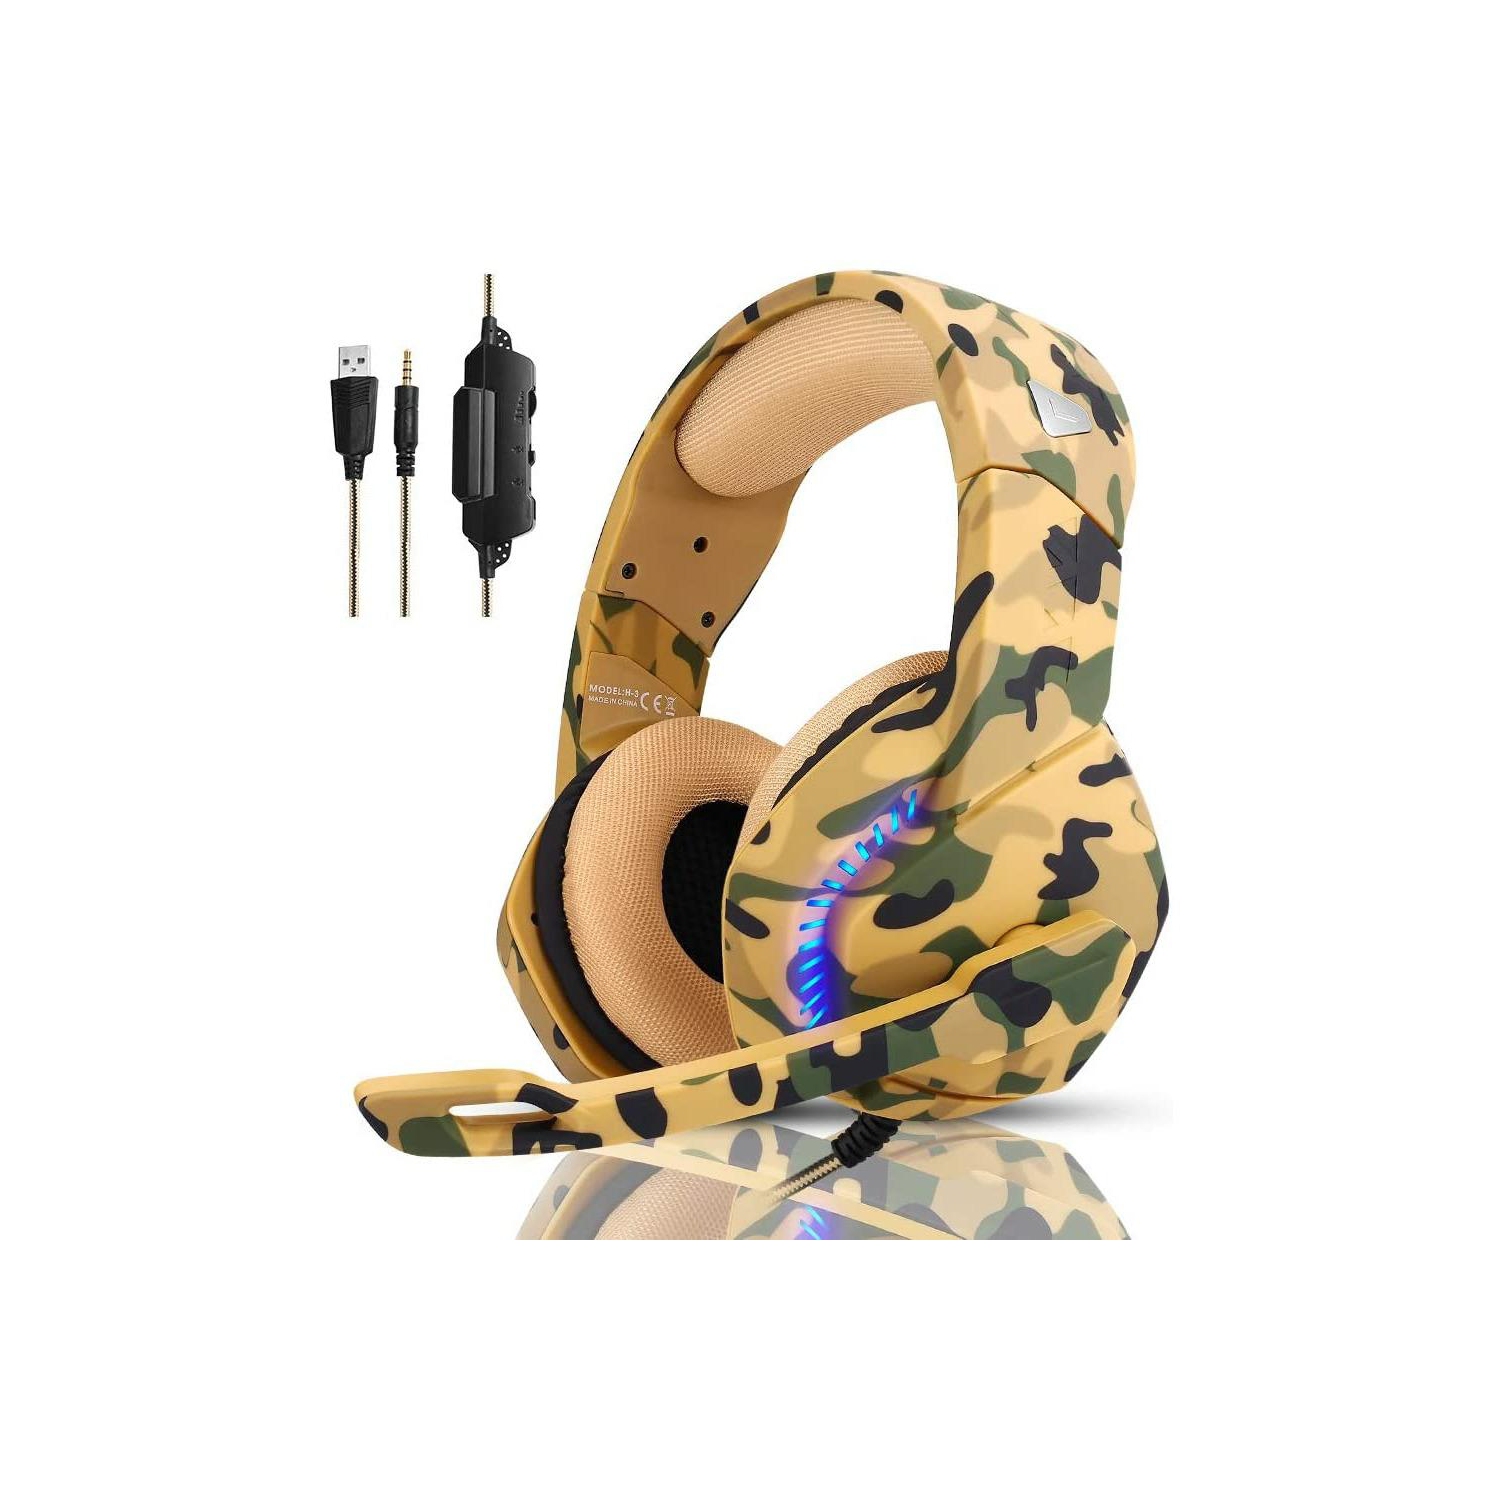 G9000 Pro Professional Noise Cancelling Gaming Headset for for PS4, PC, Xbox One Controller